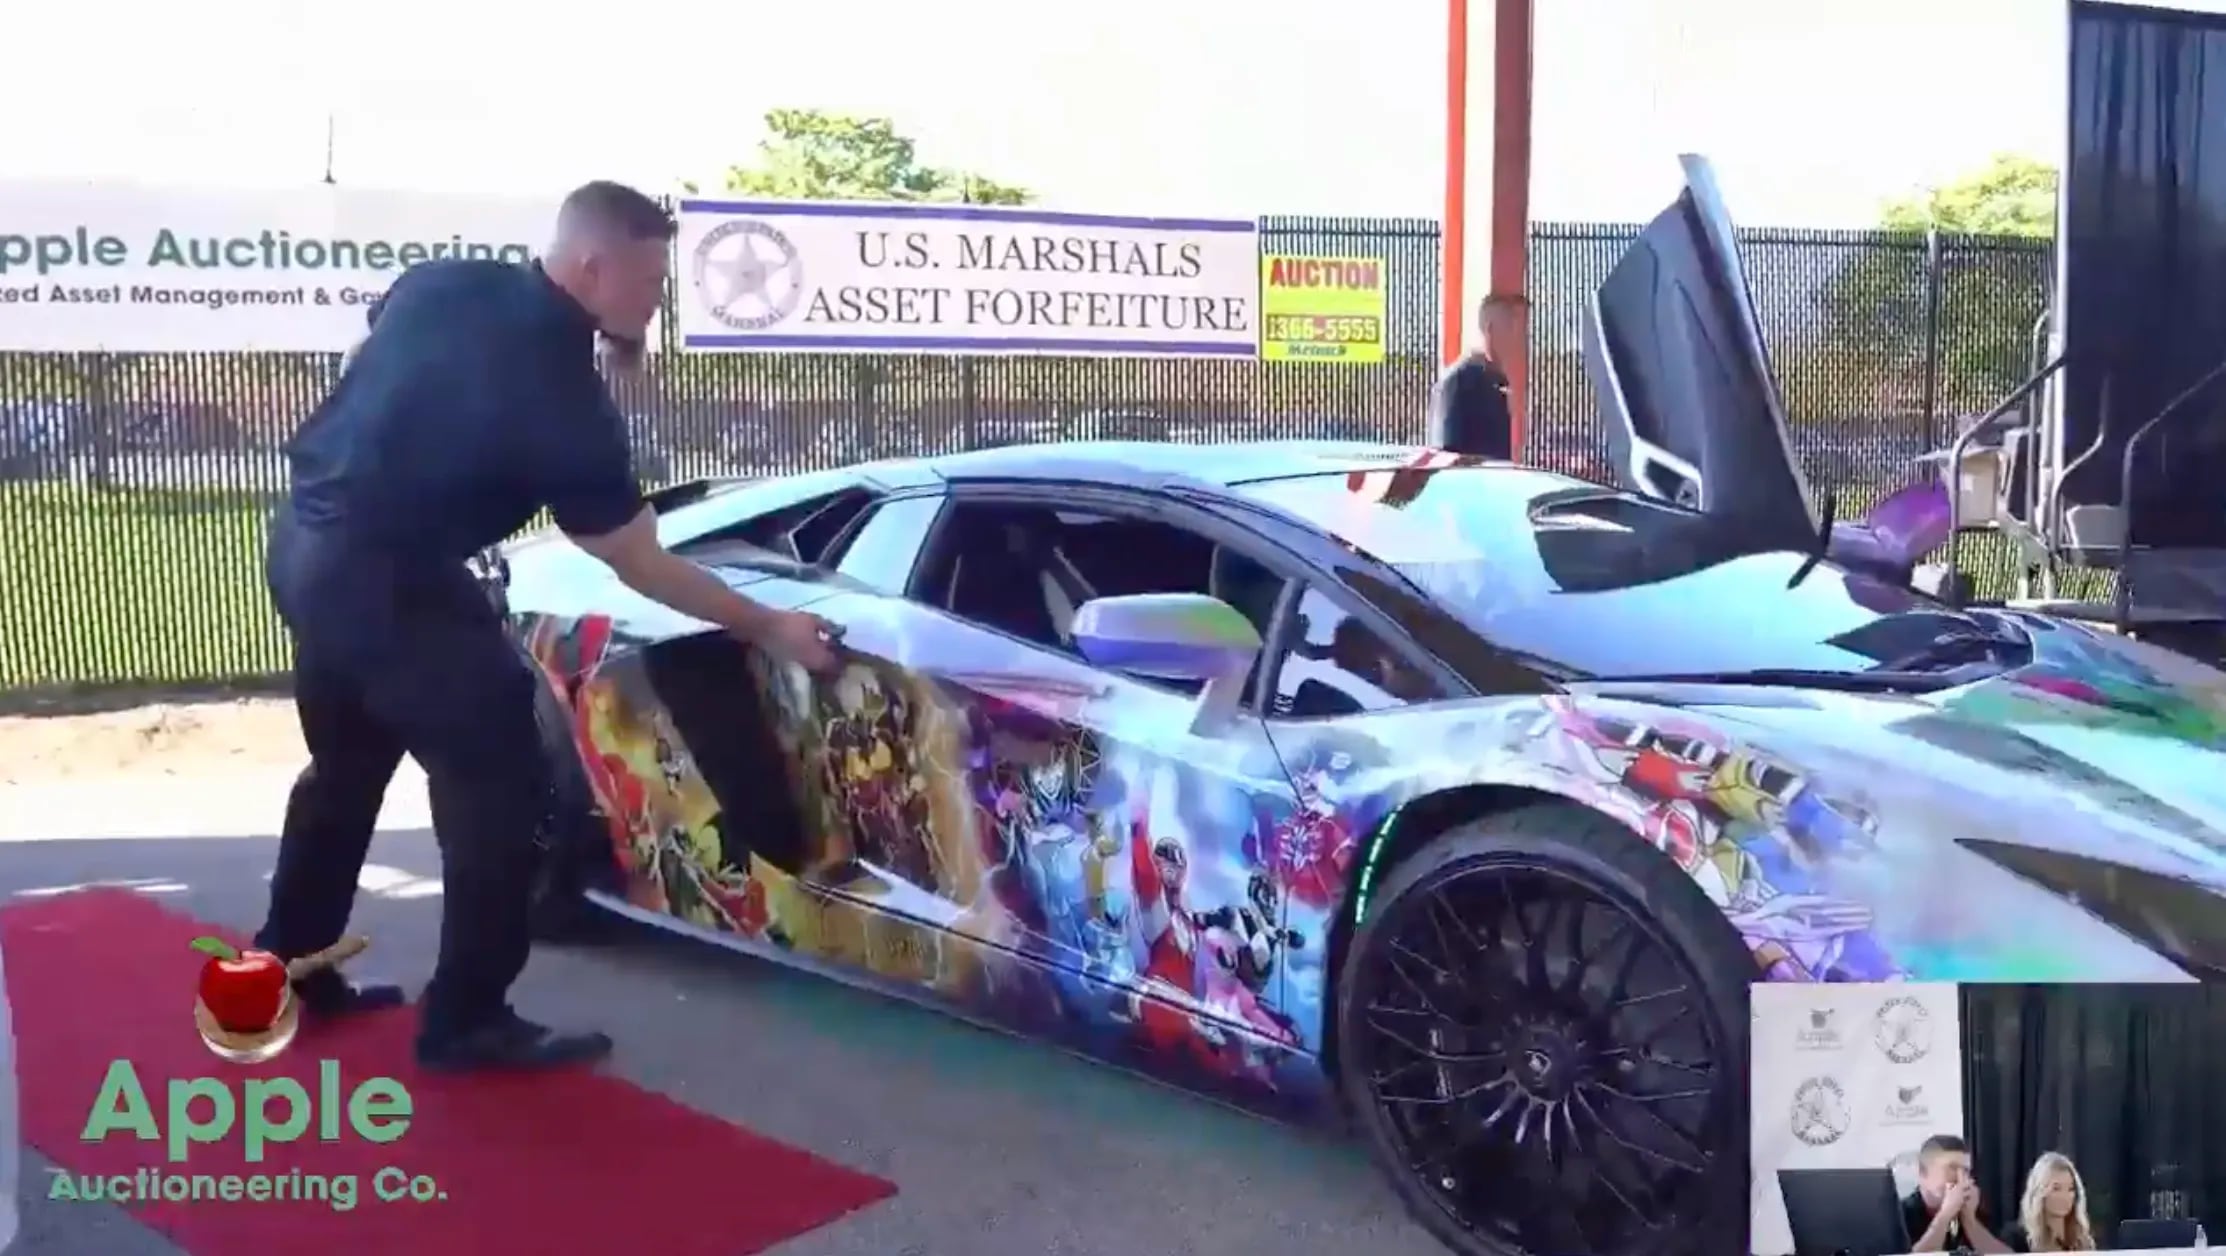 A custom-designed Power Rangers-themed Lamborghini Aventador sold for $441,000 Friday as federal authorities auctioned off assets seized from South Jersey YouTuber Omi in a Hellcat in Baltimore.